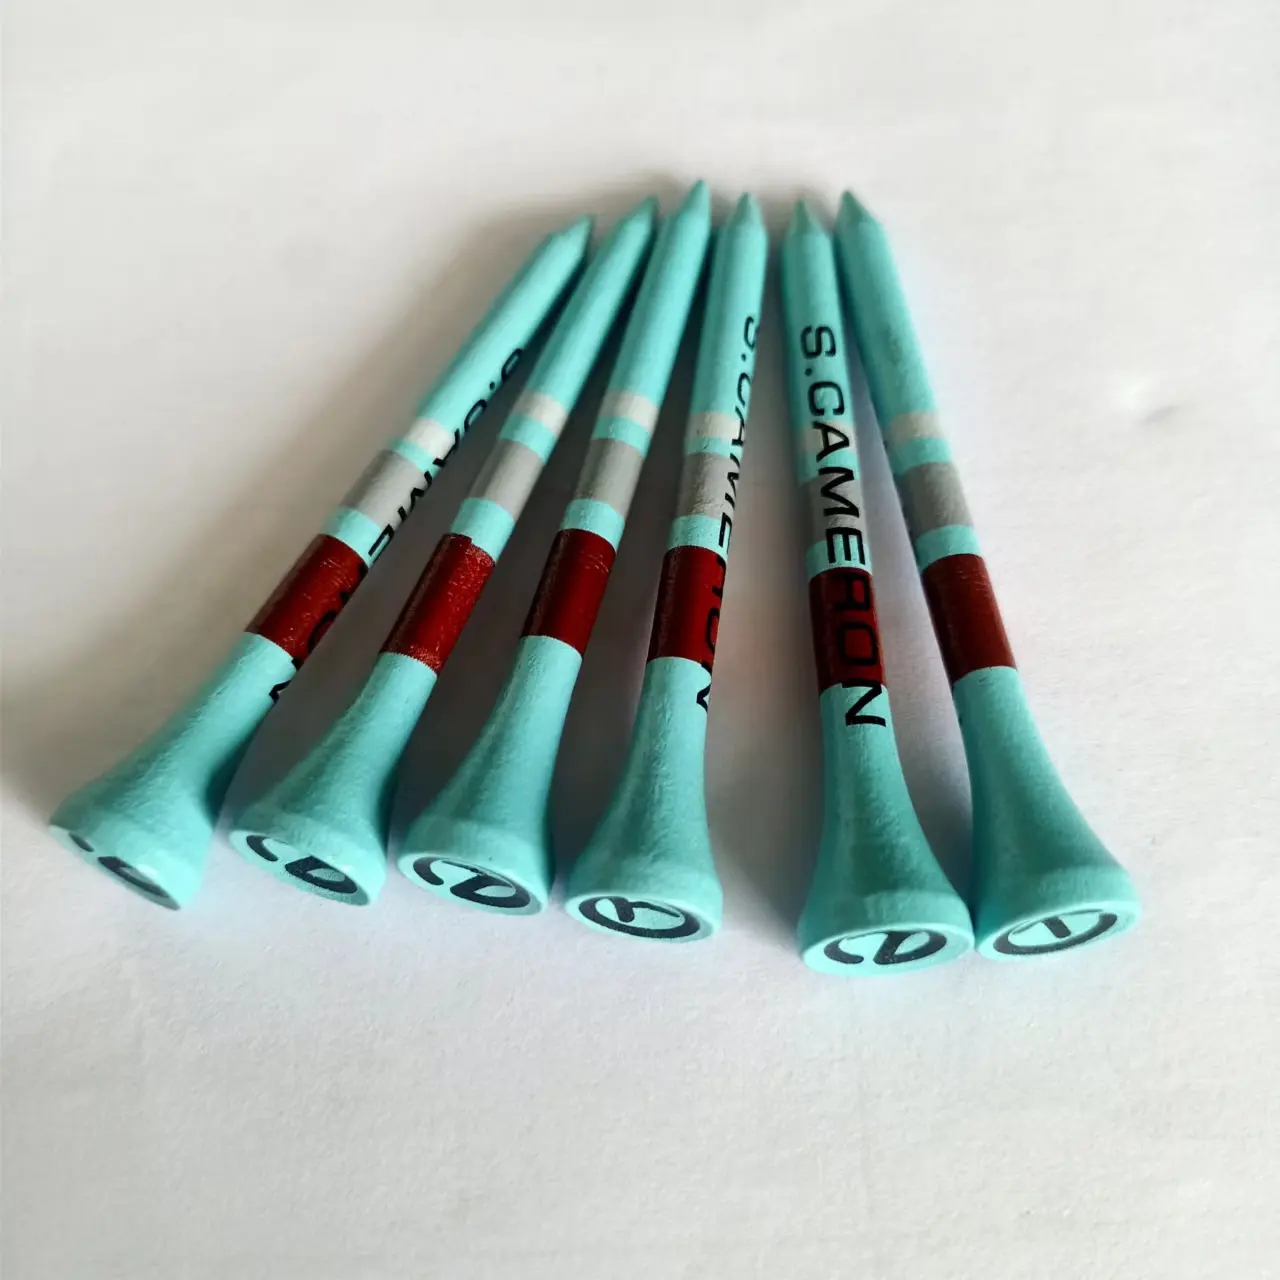 Qiangjian Wholesales Customized Letter Logo Print Blue Green 70mm Bamboo Golf Tees For Golf Play